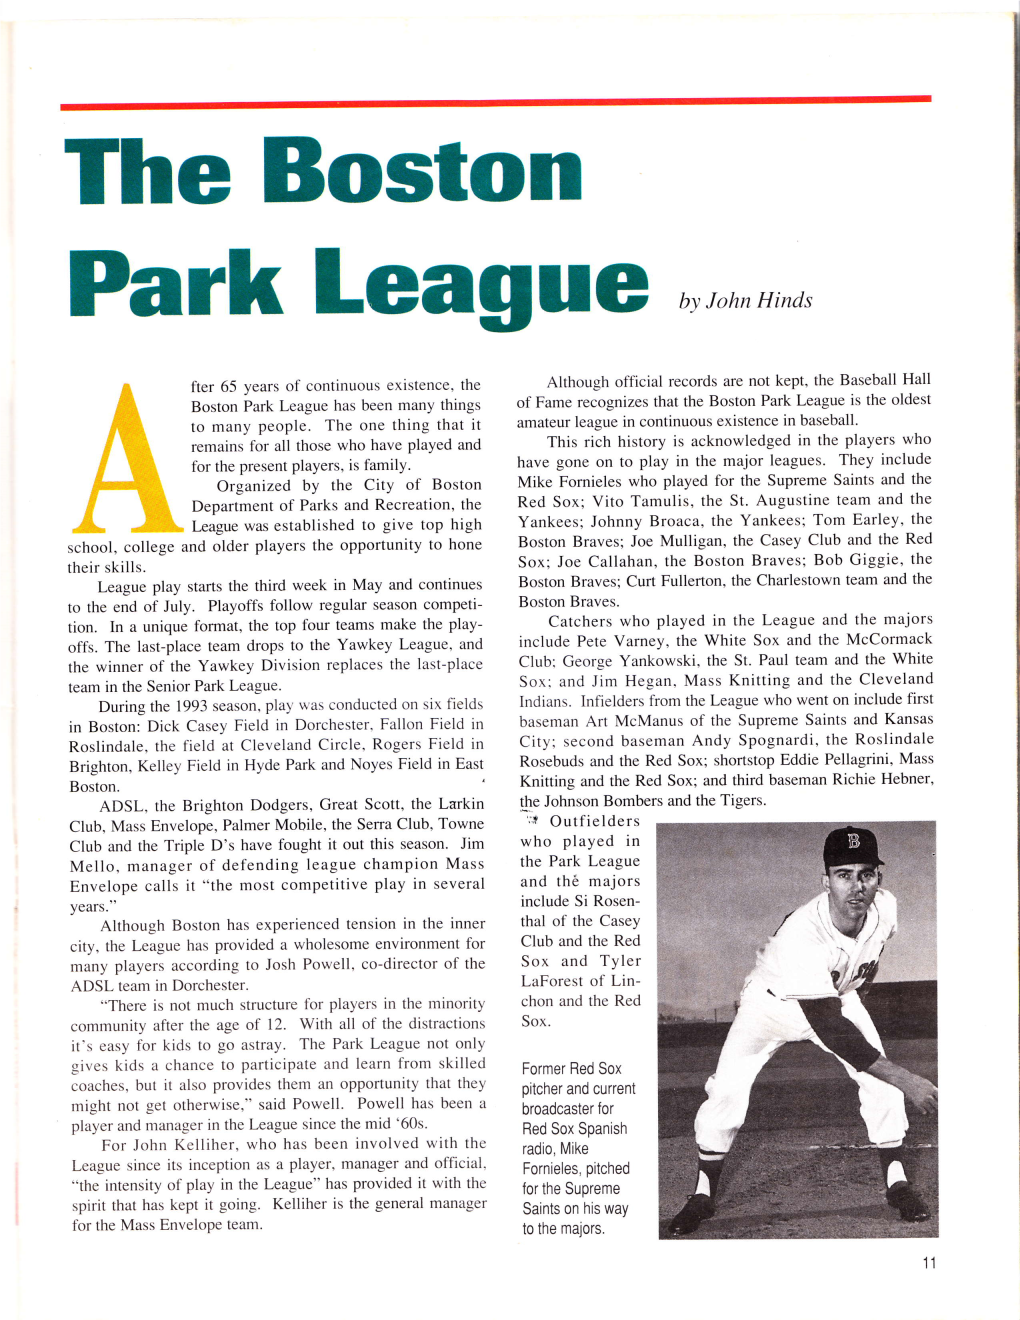 The Boston Park League, by John Hinds